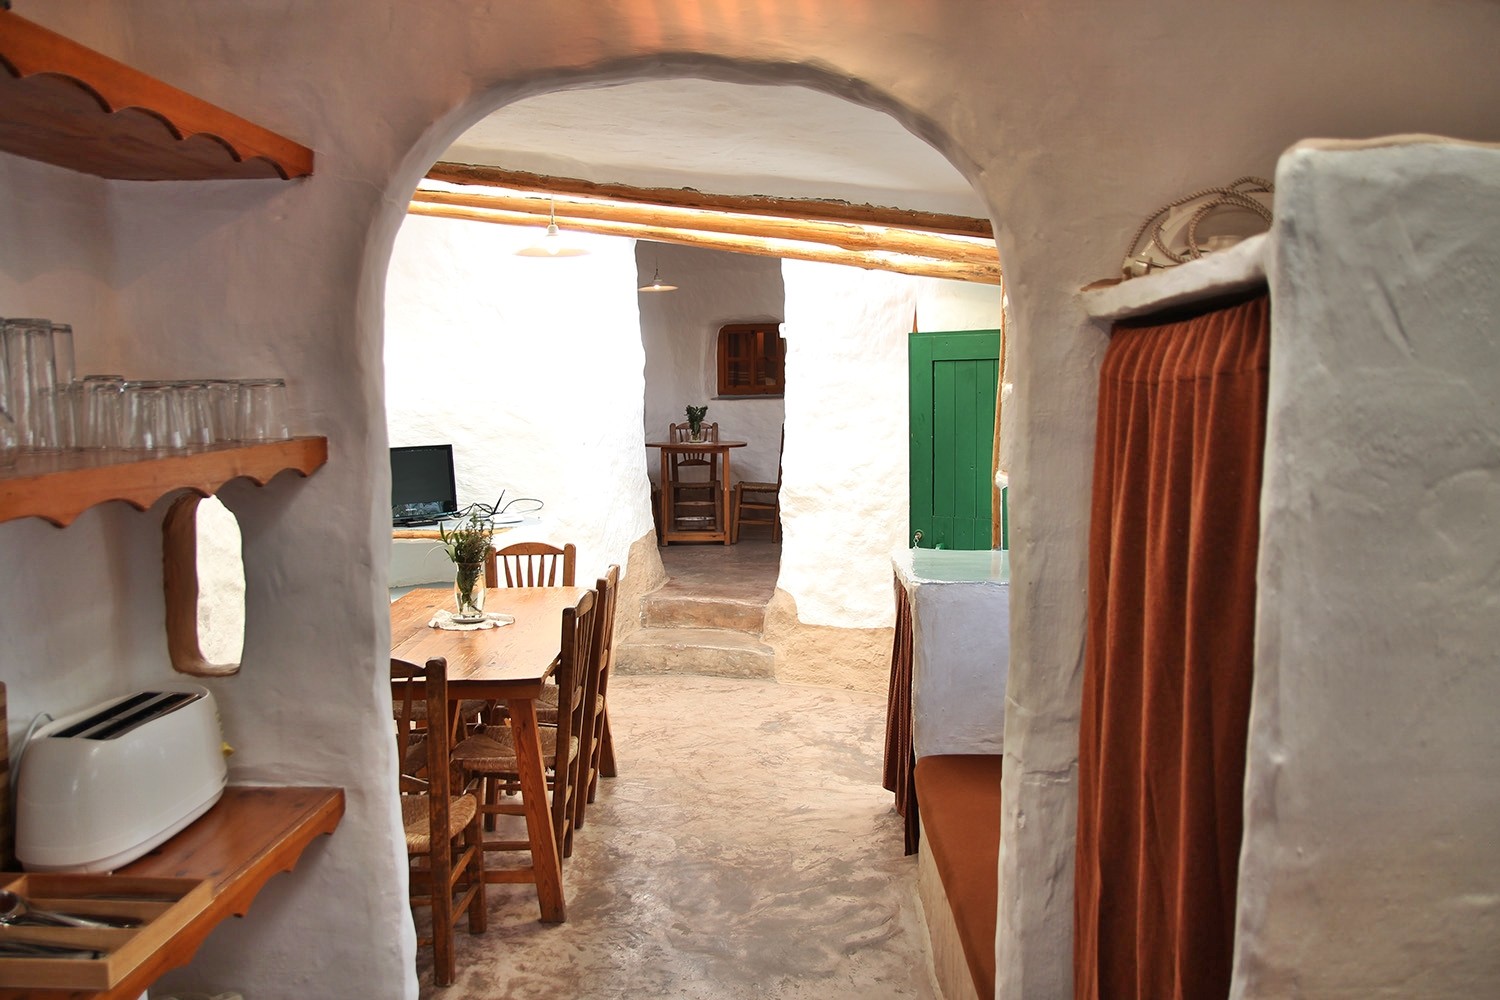 View from the kitchen to the dinning room